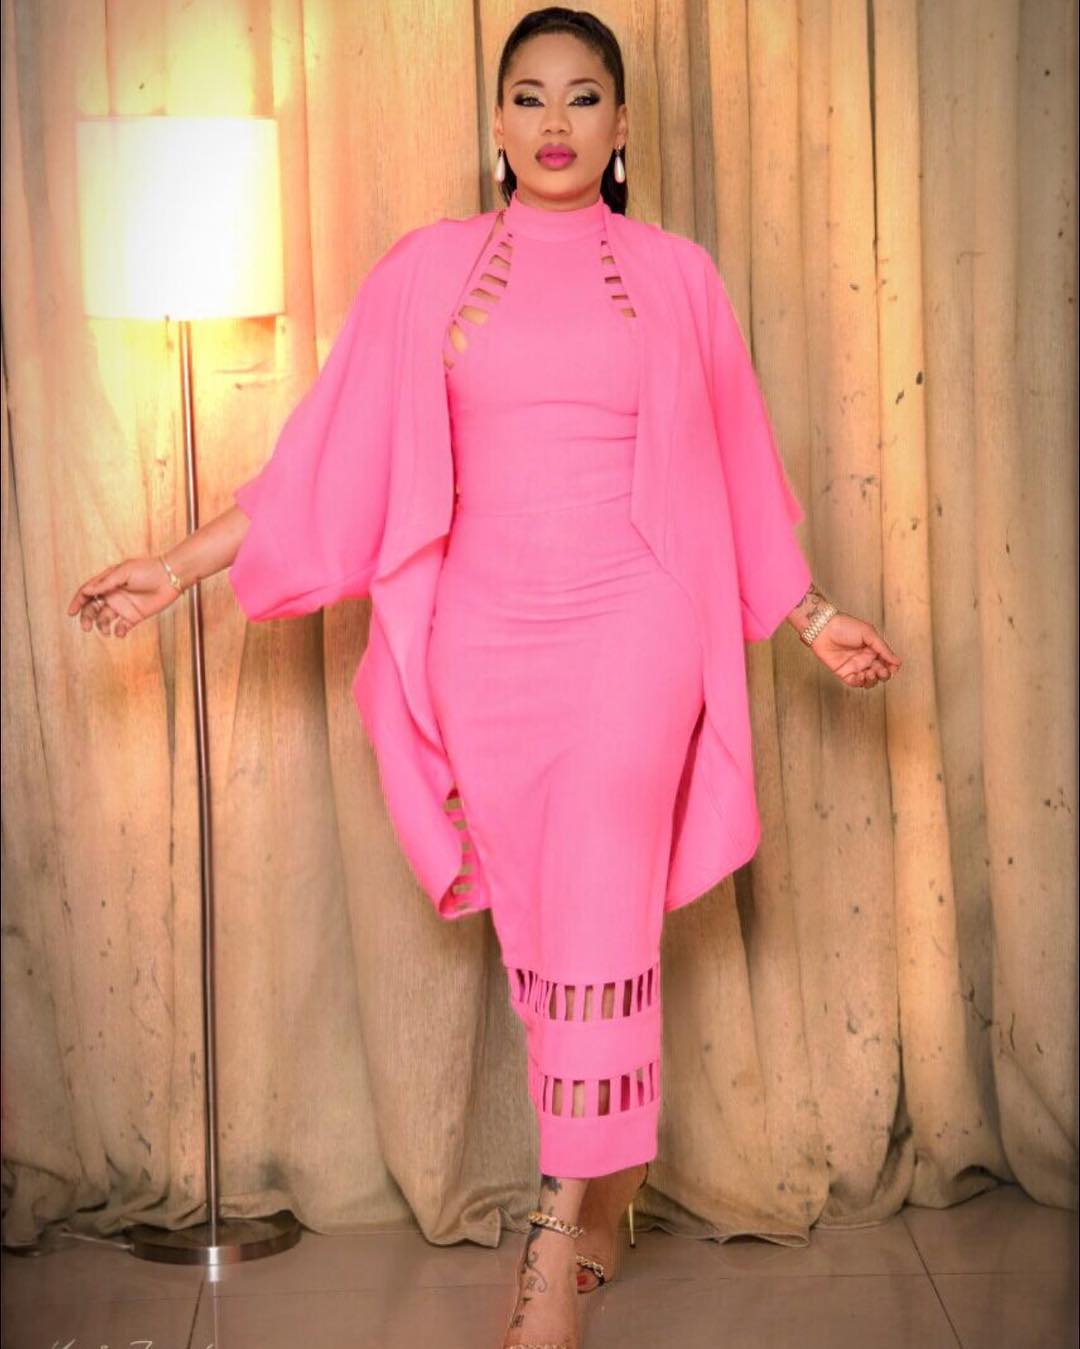 Toyin Lawani goes after social media user and her kid after the woman came for Toyin's son.